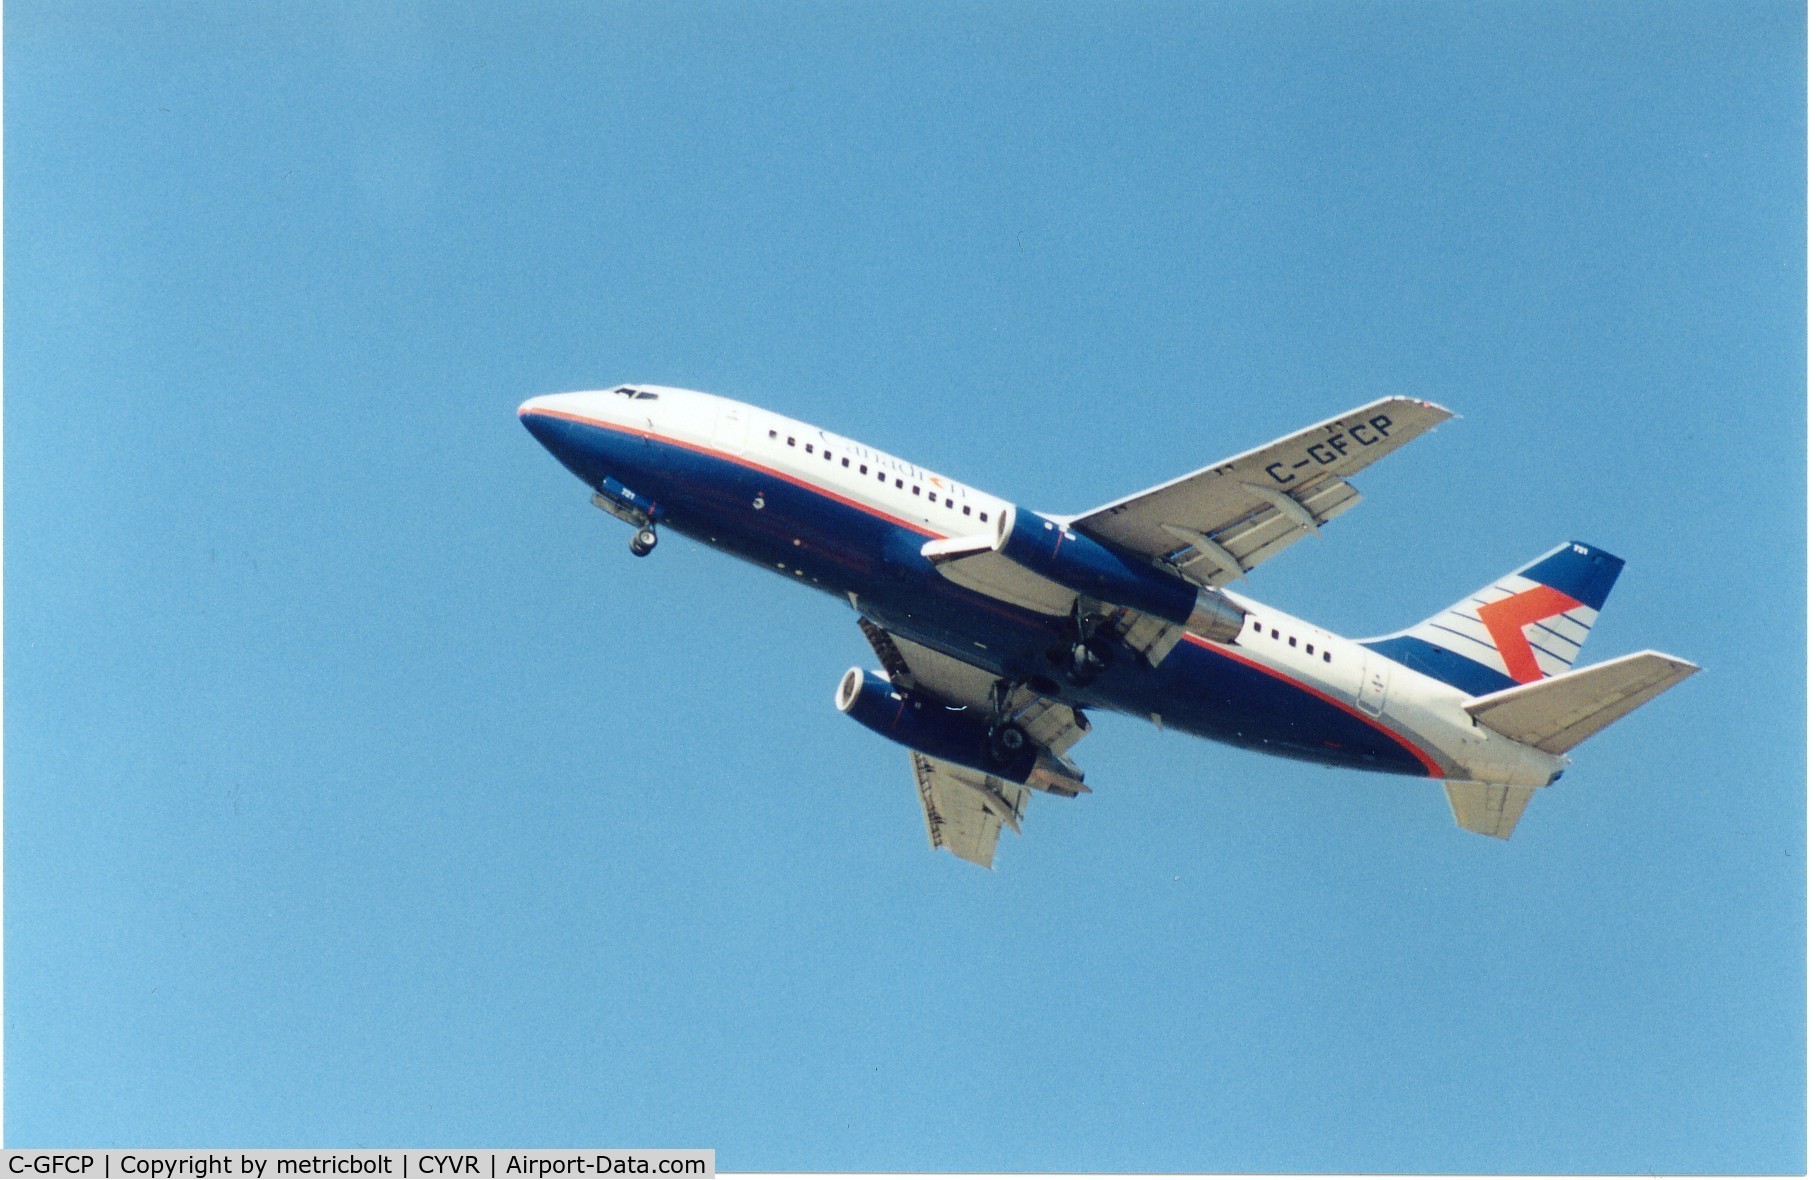 C-GFCP, 1982 Boeing 737-217 C/N 22659, Wearing full Canadian Airlines livery,late 90s.